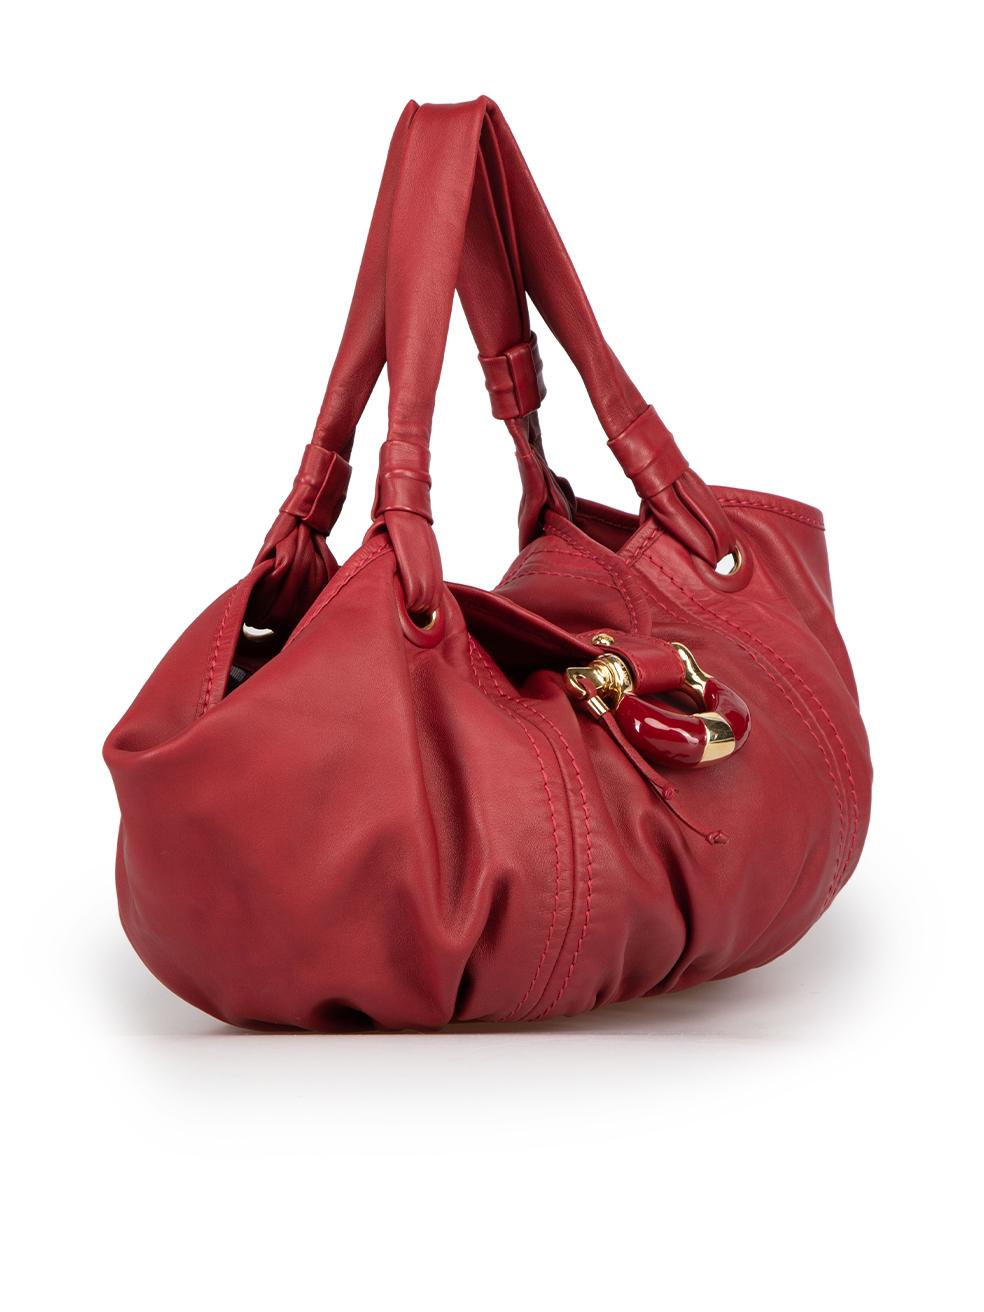 CONDITION is Very good. Minimal wear to bag is evident. Minimal wear to the sides, back, base and base corners with very light abrasions to the leather on this used Jimmy Choo designer resale item.
 
Details
Red
Leather
Medium shoulder bag
2x Top